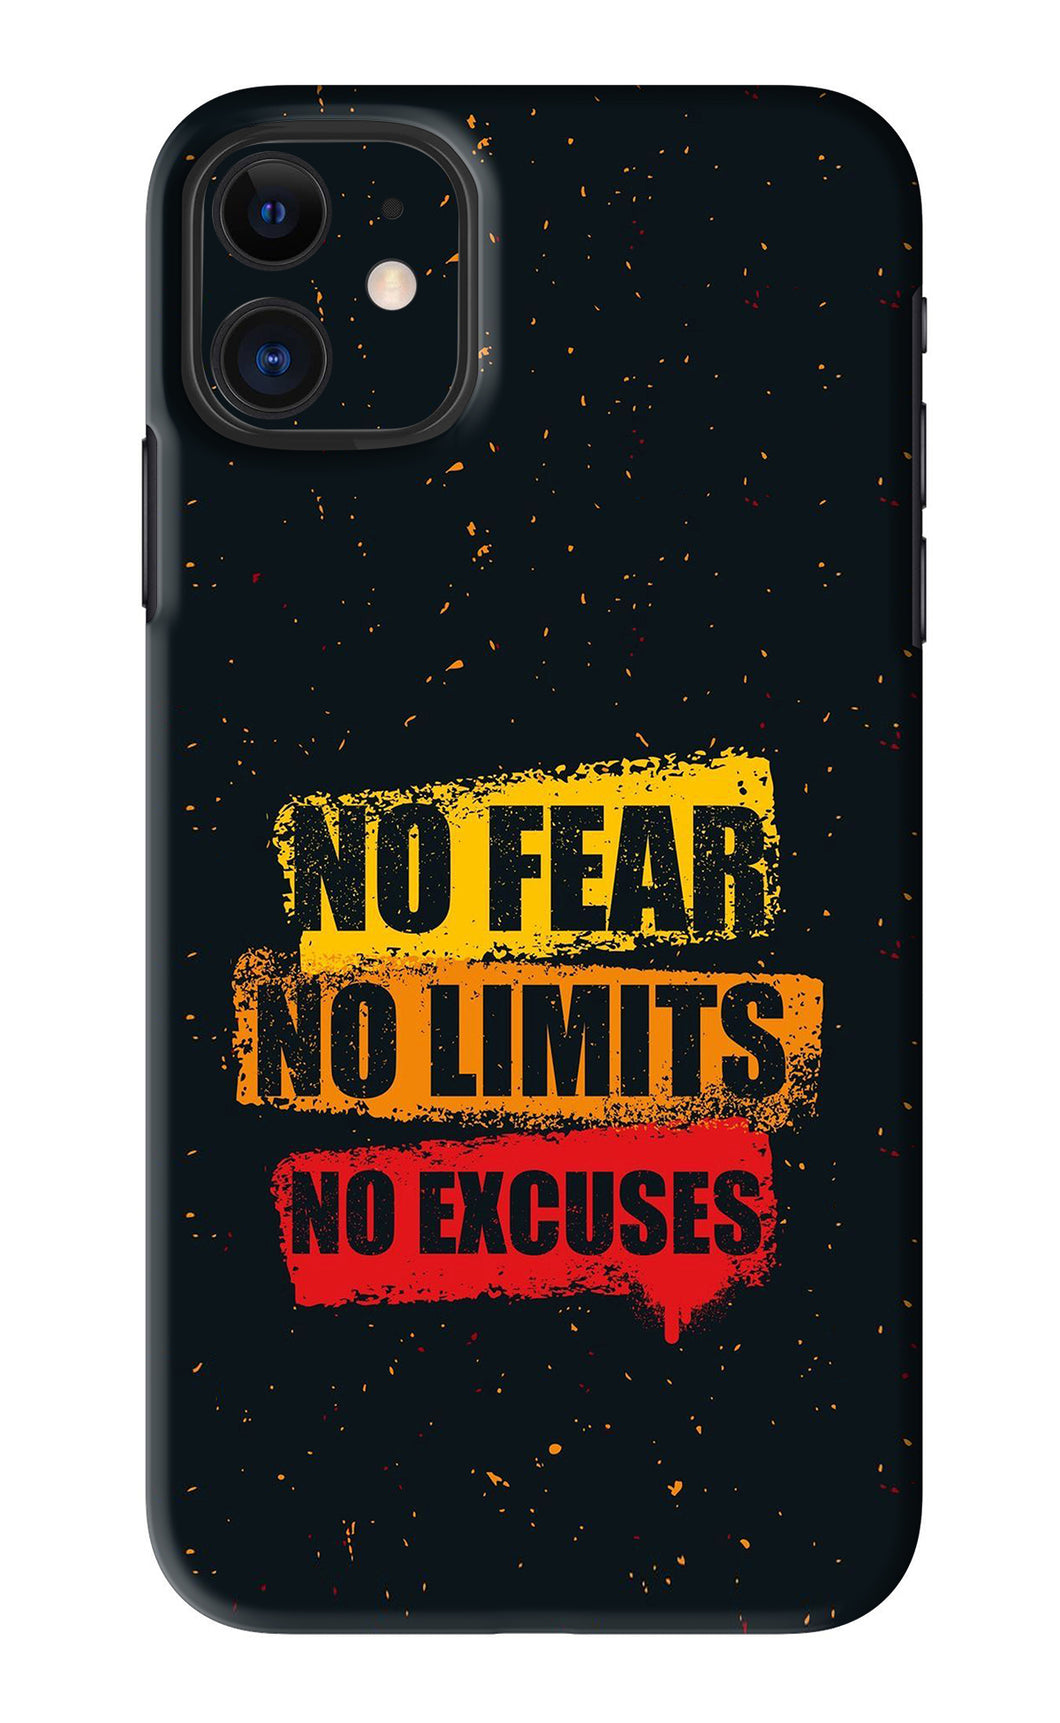 No Fear No Limits No Excuses iPhone 11 Back Skin Wrap